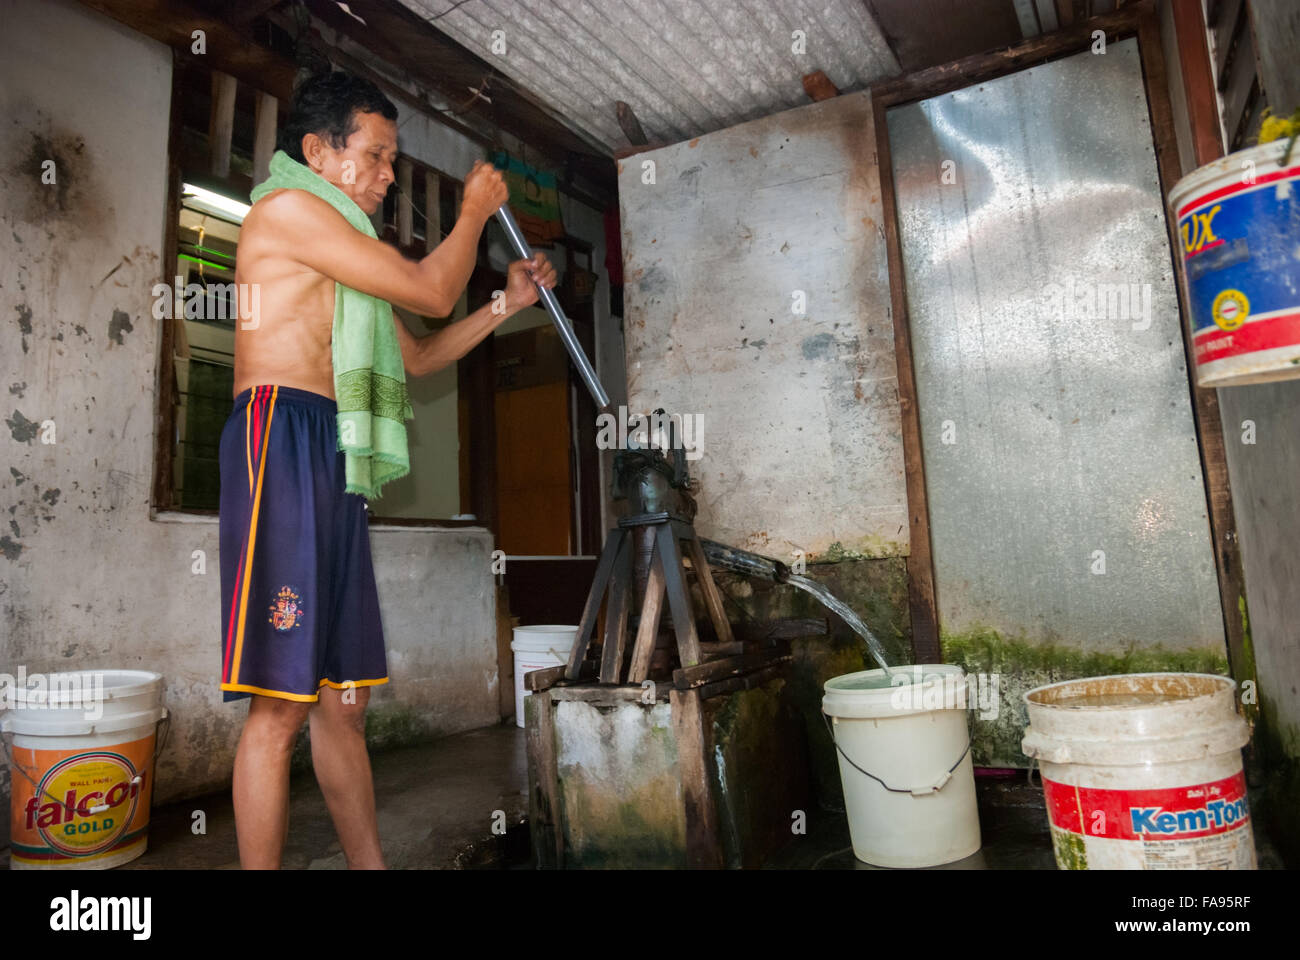 Residence of a dense neighborhood in Jakarta pumping waters from communal well. Stock Photo